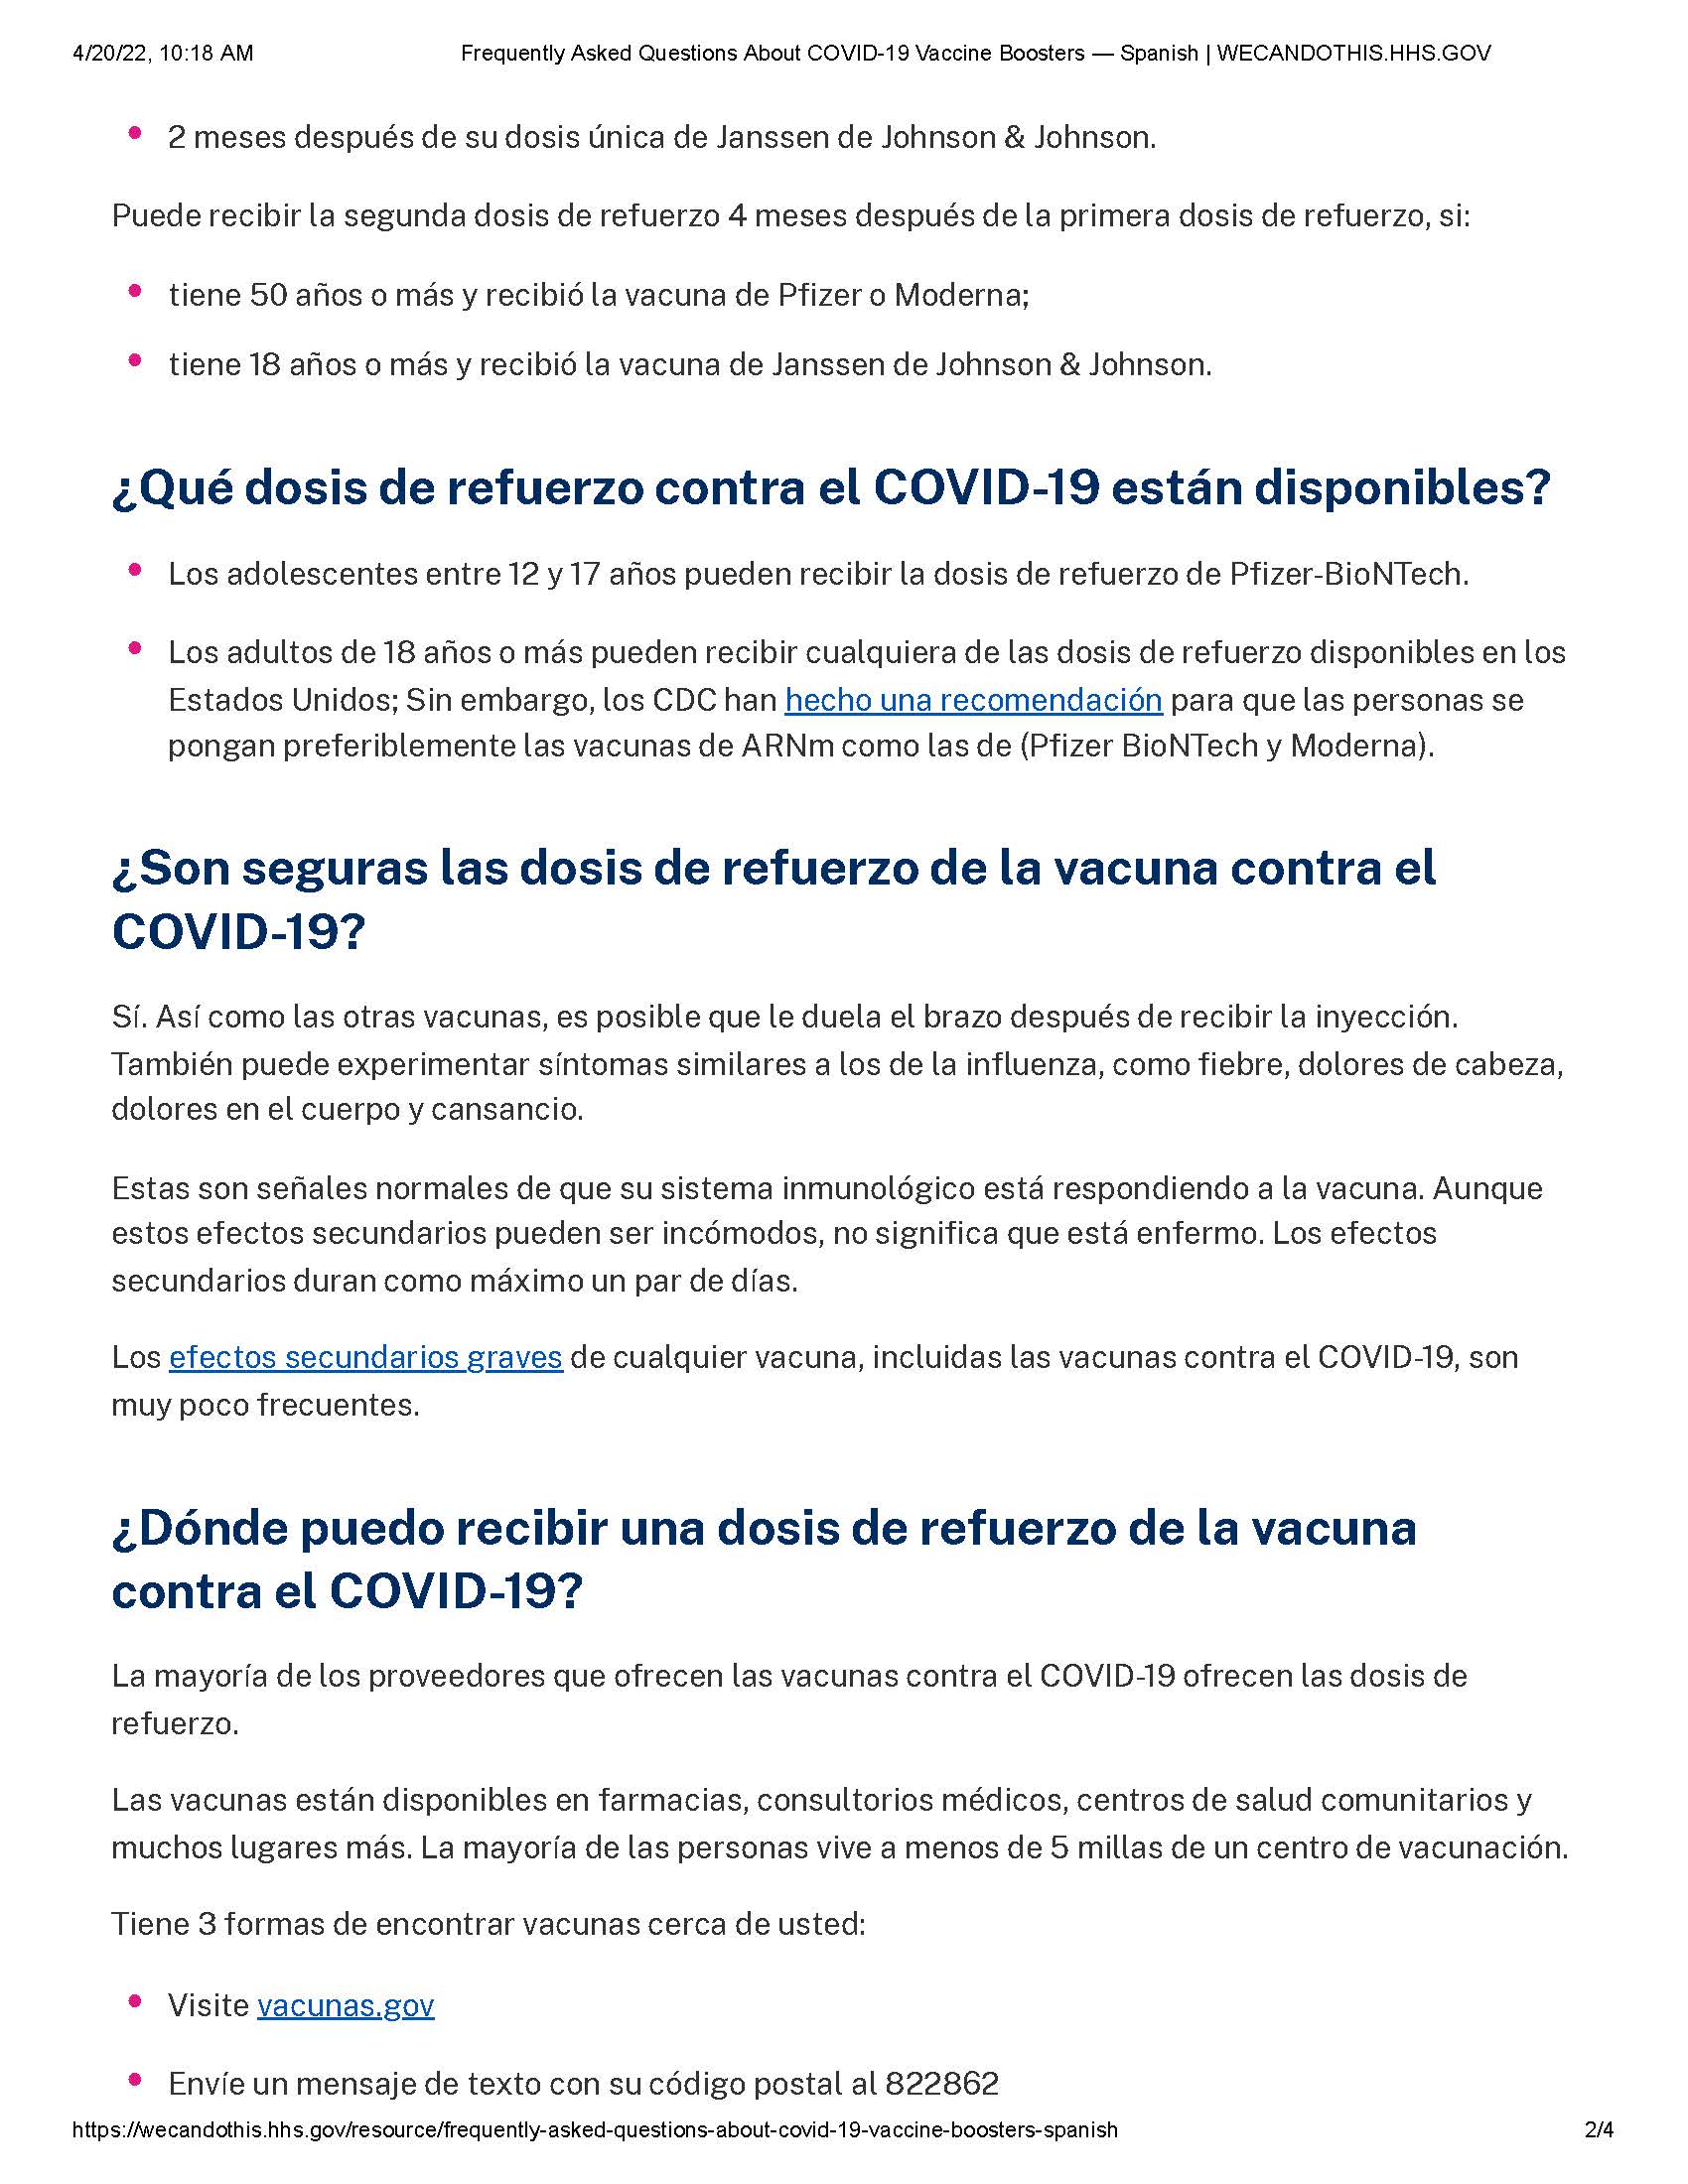 Frequently Asked Questions About COVID-19 Vaccine Boosters — Spanish _ WECANDOTHIS.HHS.GOV_Page_2